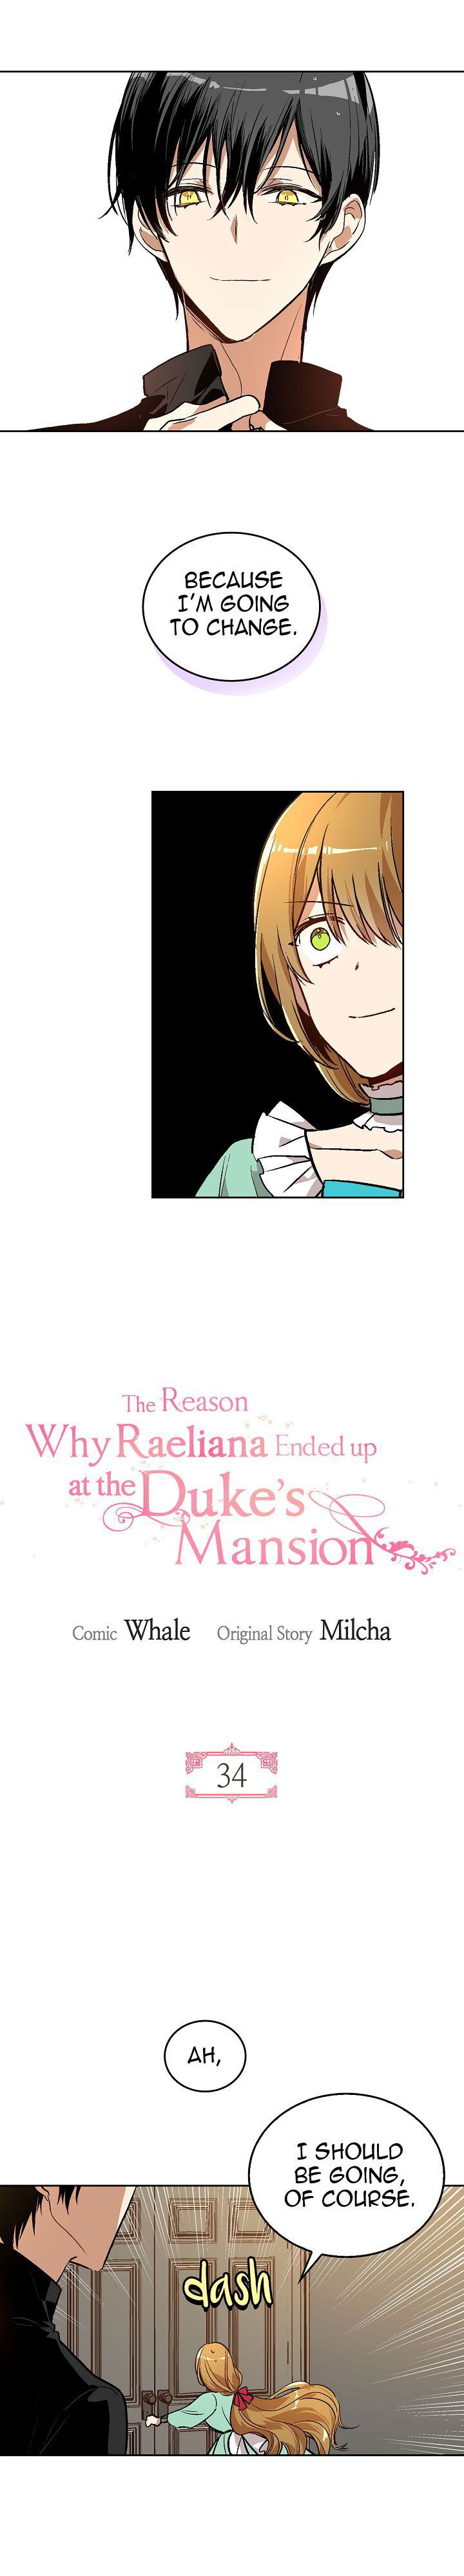 The Reason Why Raeliana Ended Up at the Duke's Mansion Chapter 034 page 2